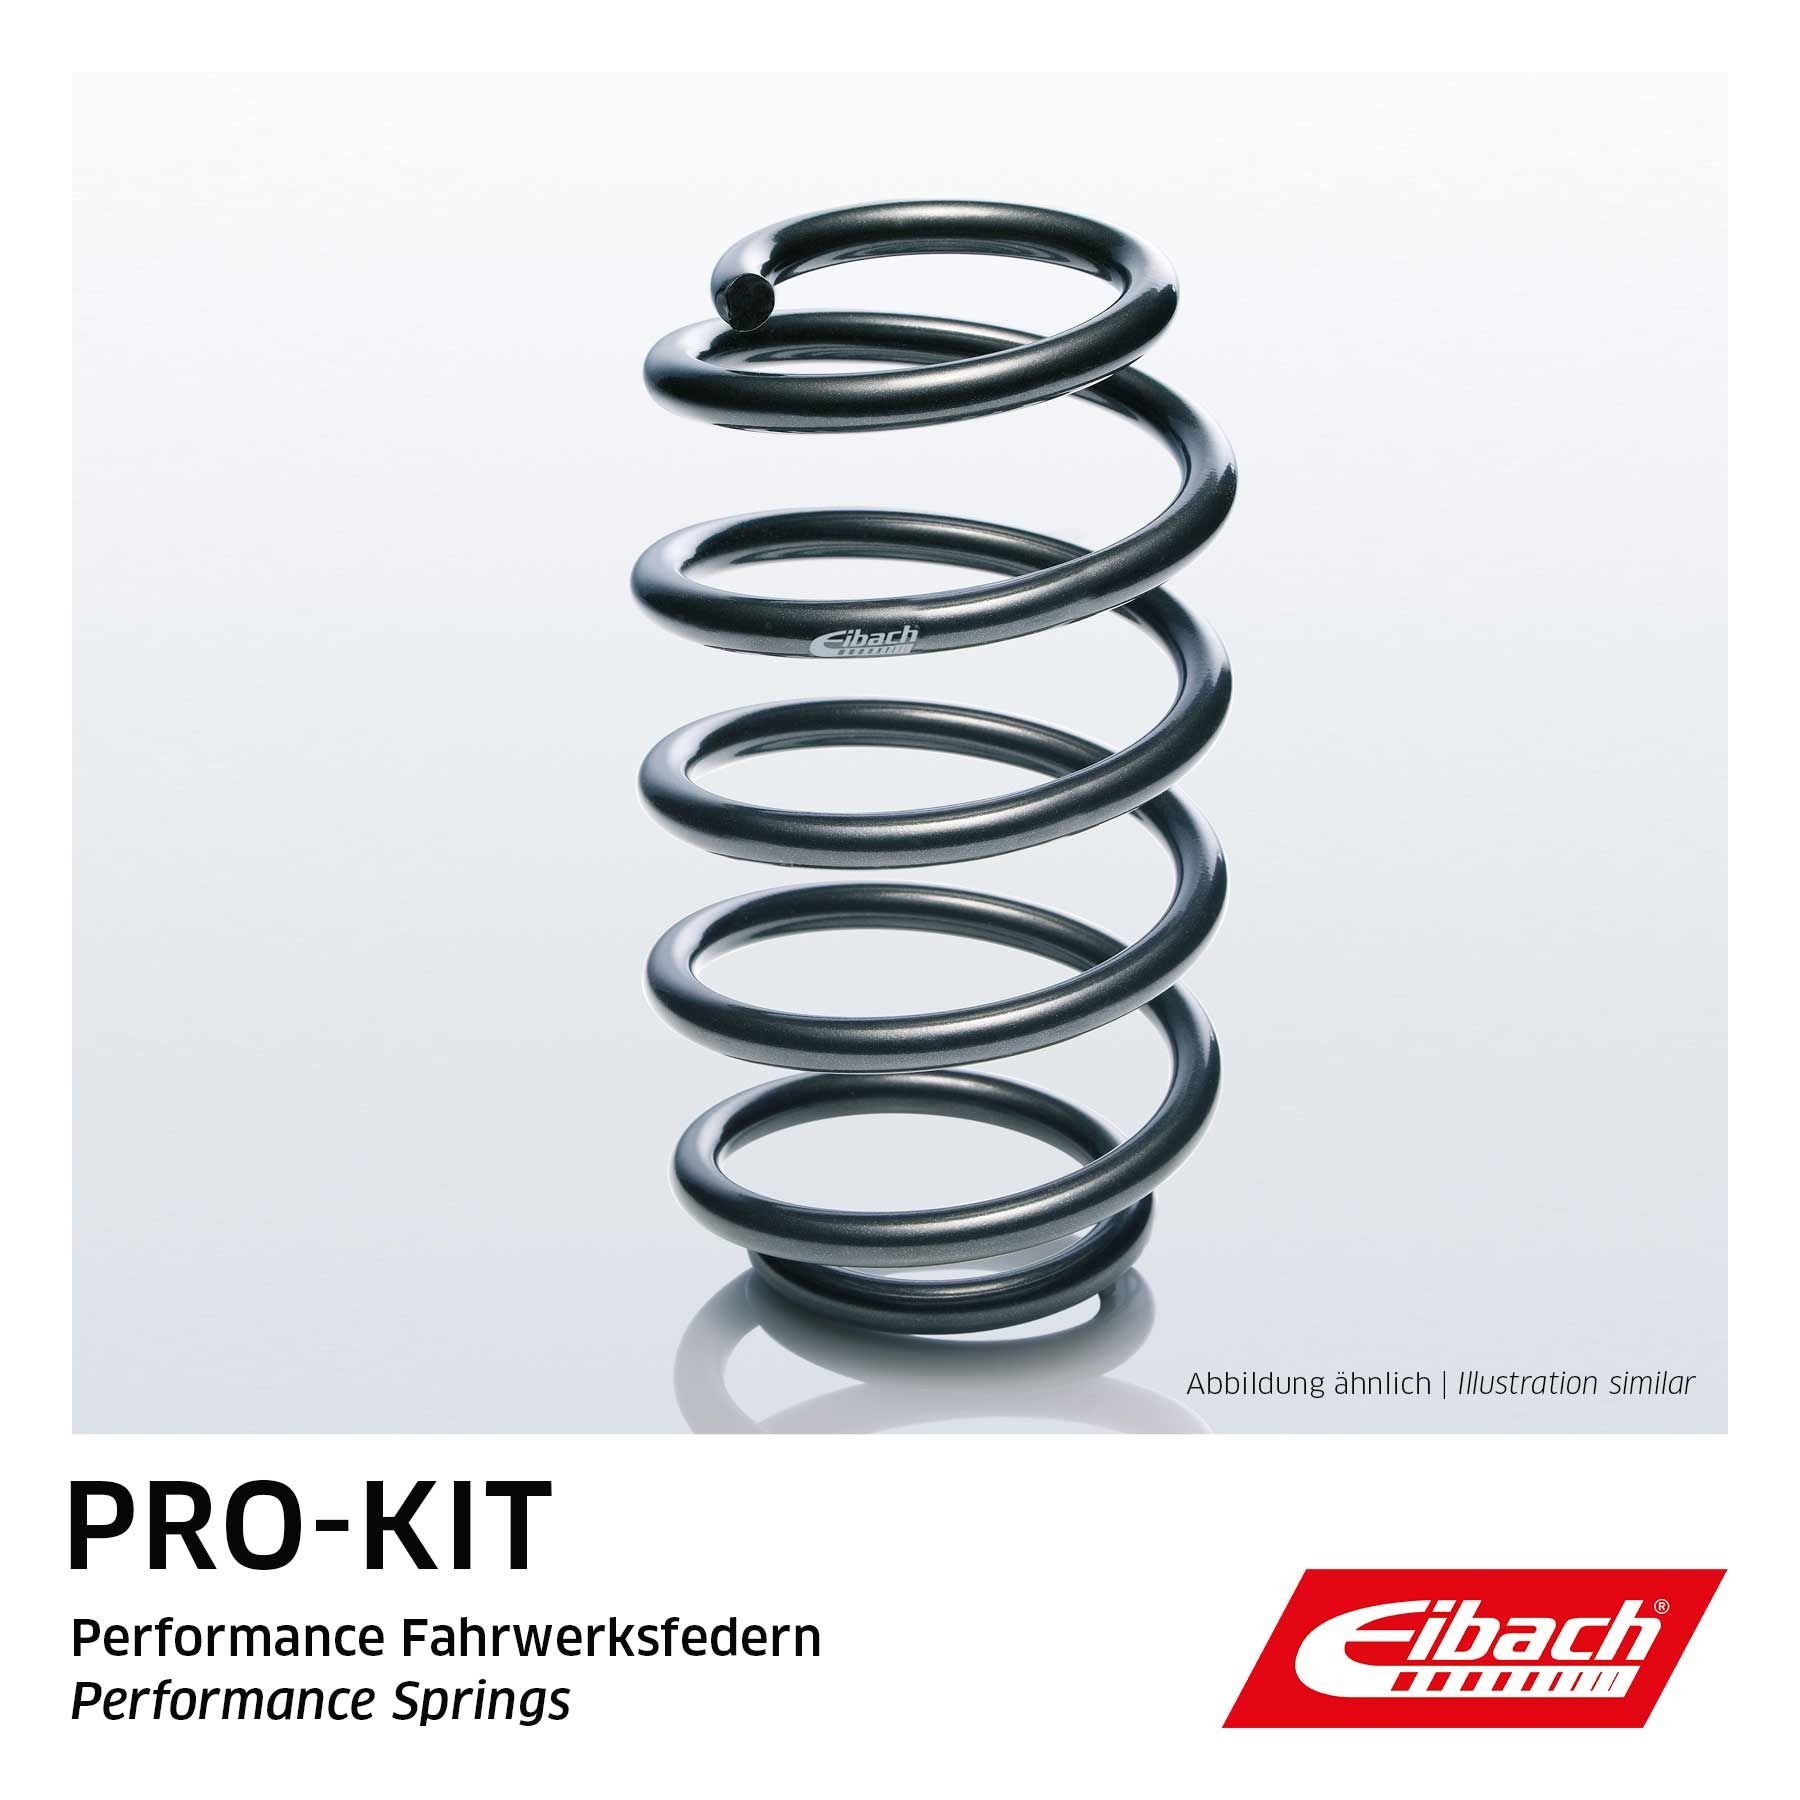 Astra L Sports Tourer Shock absorption parts - Coil spring EIBACH F11-70-019-01-FA